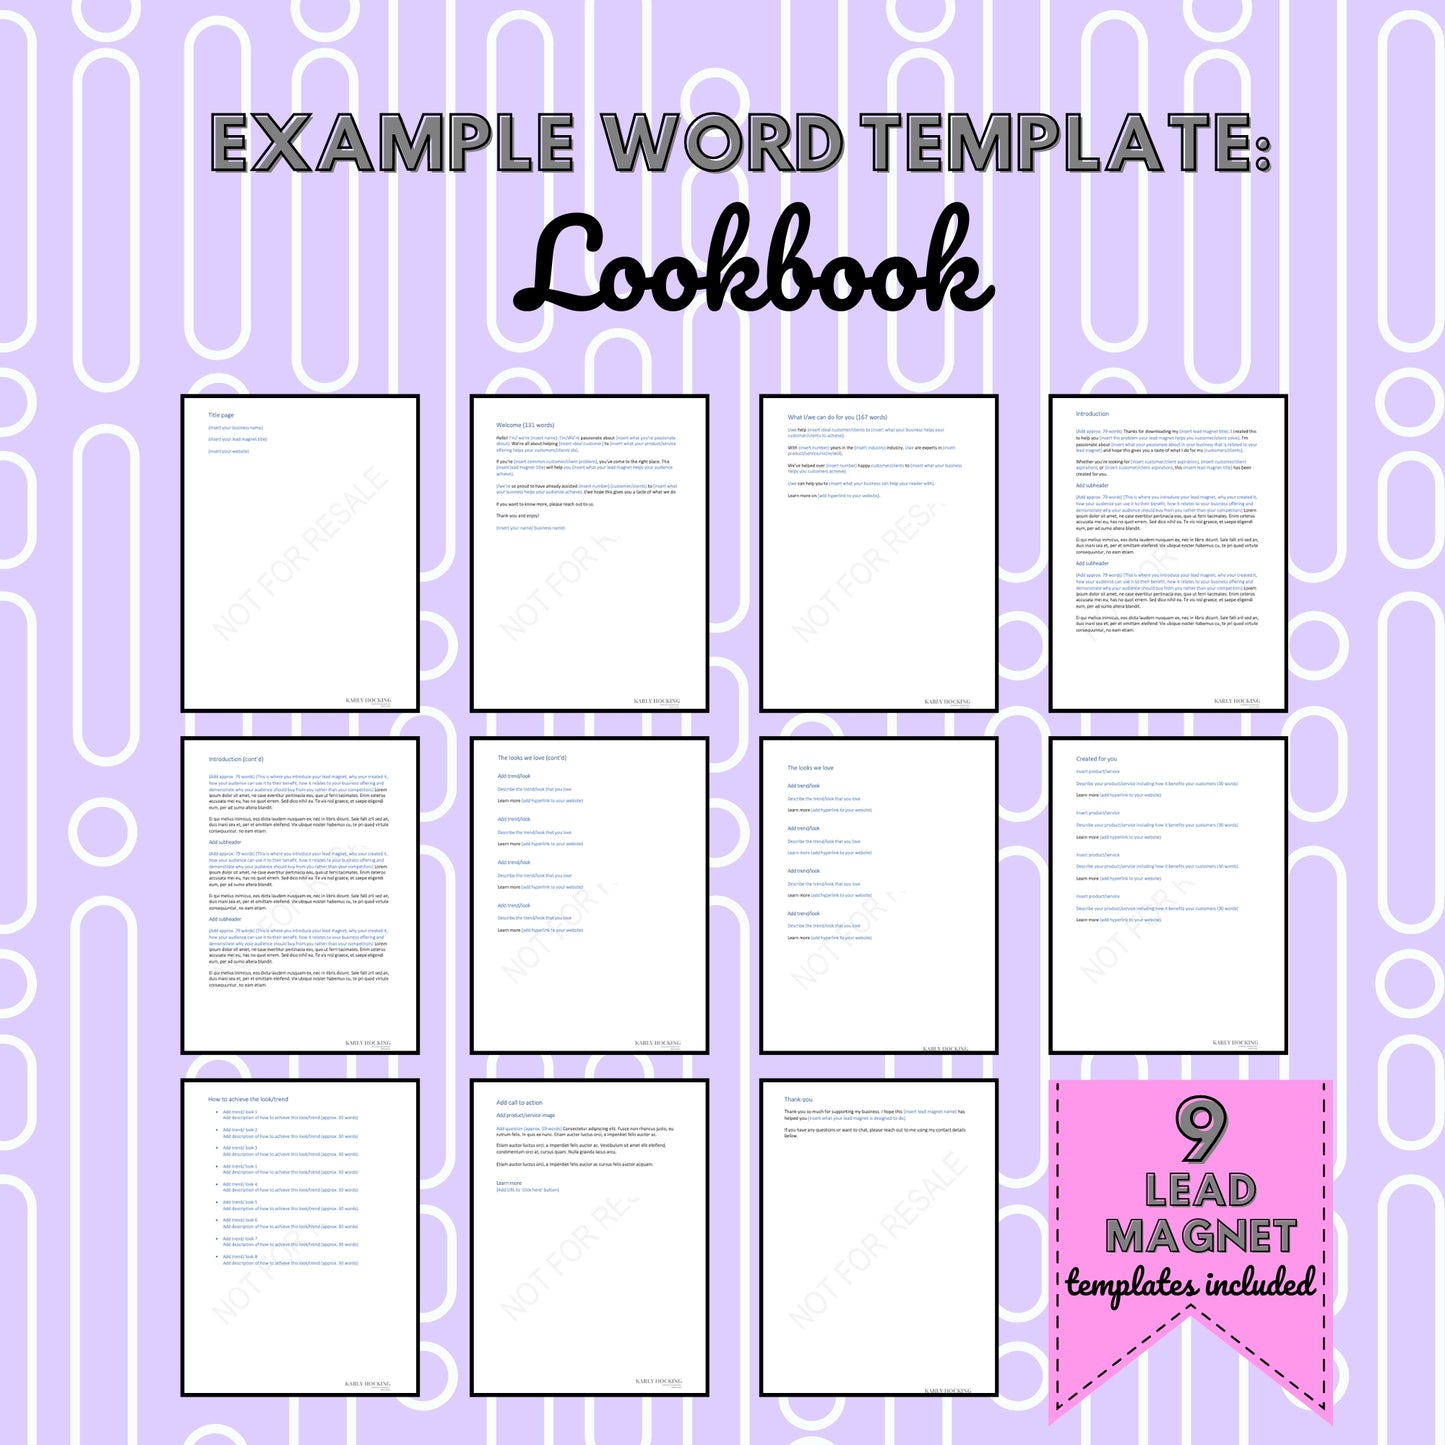 Ultimate Lead Magnet Templates and Guide - Instant download